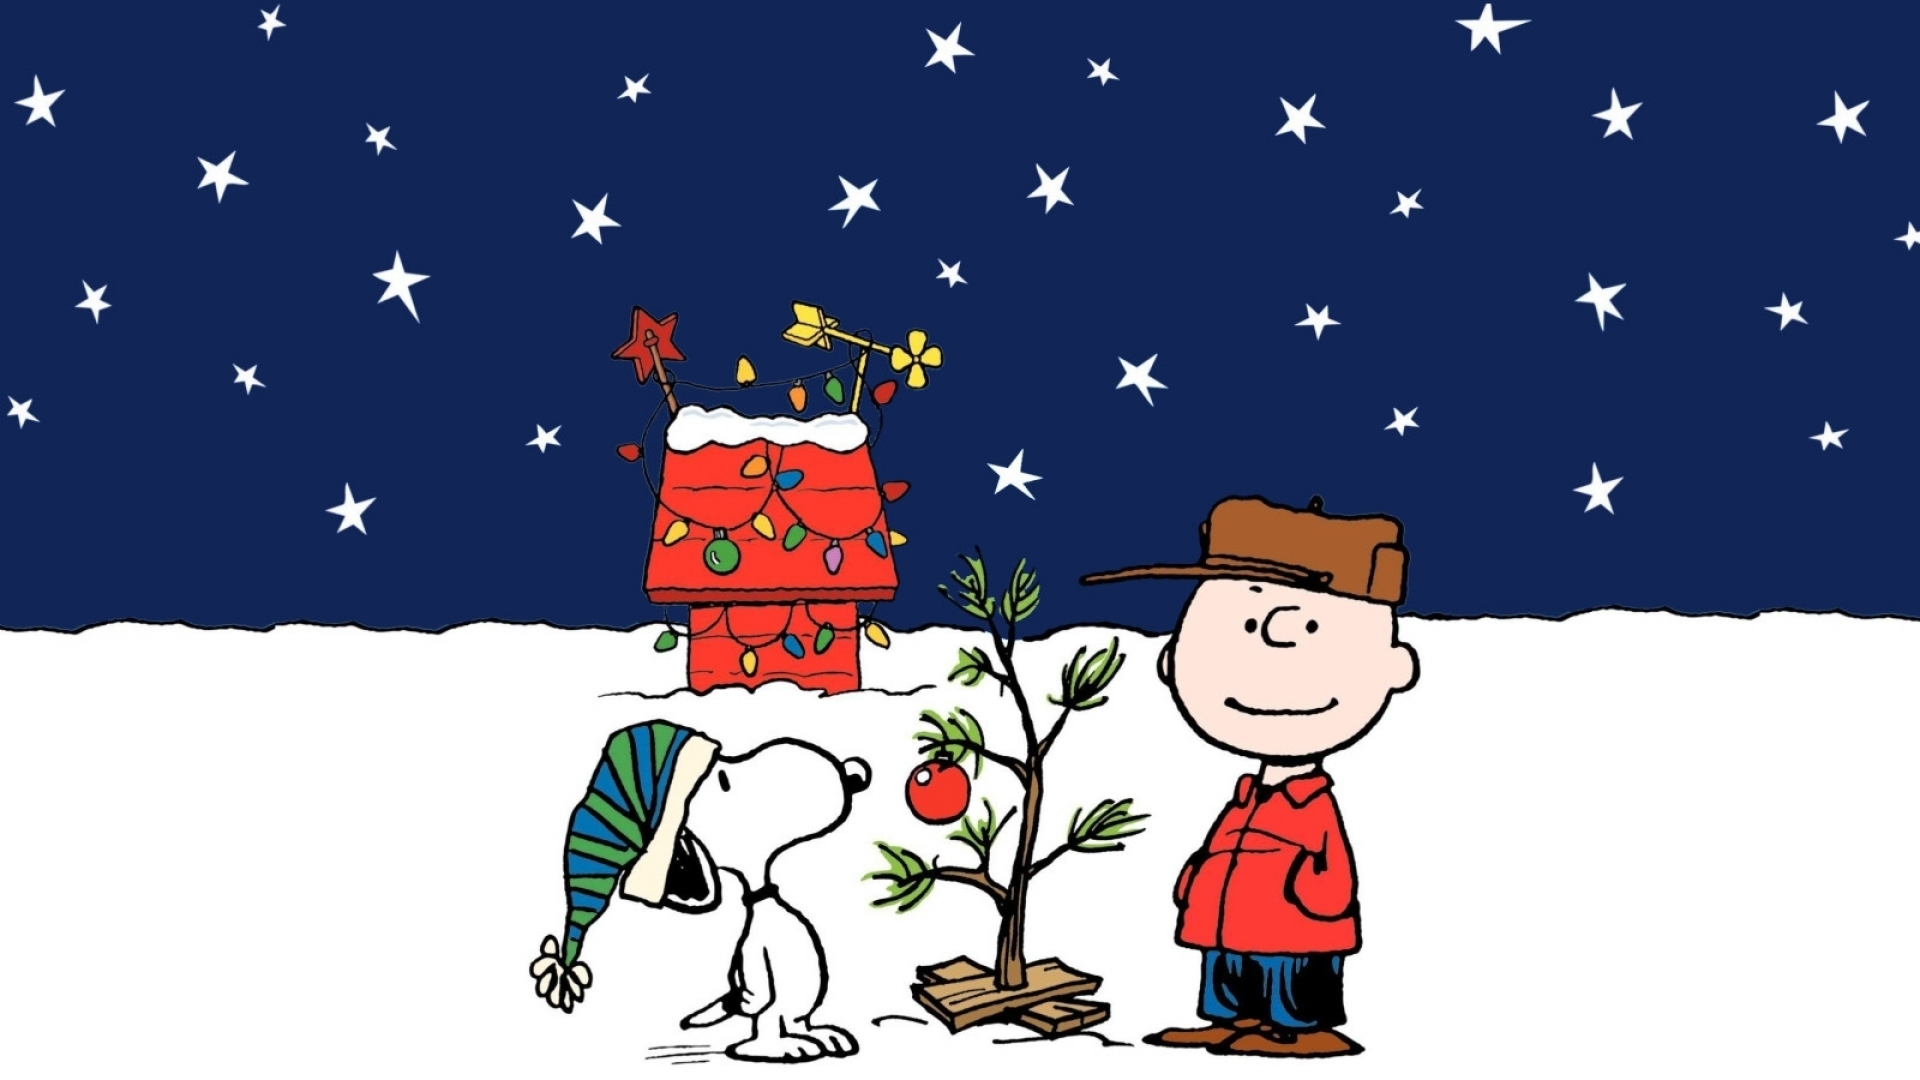 Snoopy Christmas Puter Wallpaper On